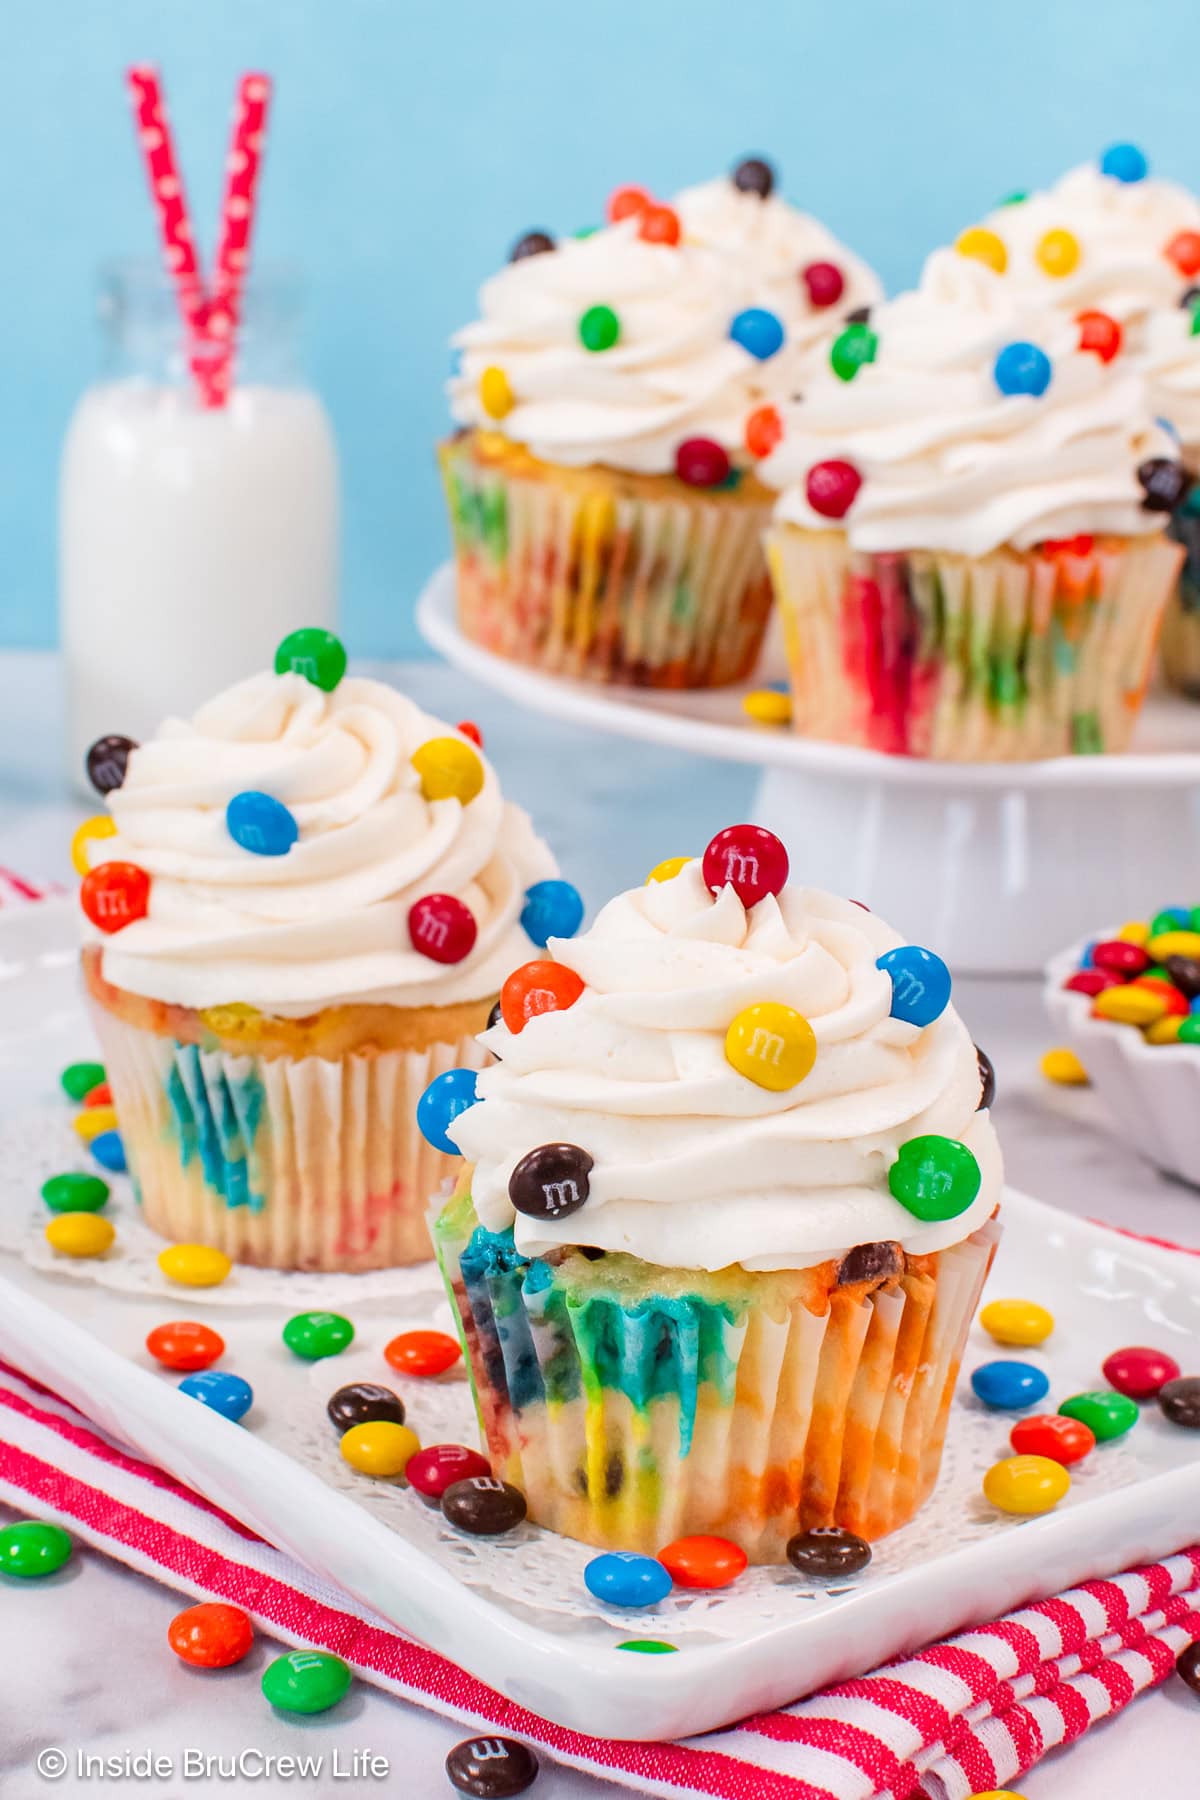 Two vanilla cupcakes on a plate with colorful candies on top.